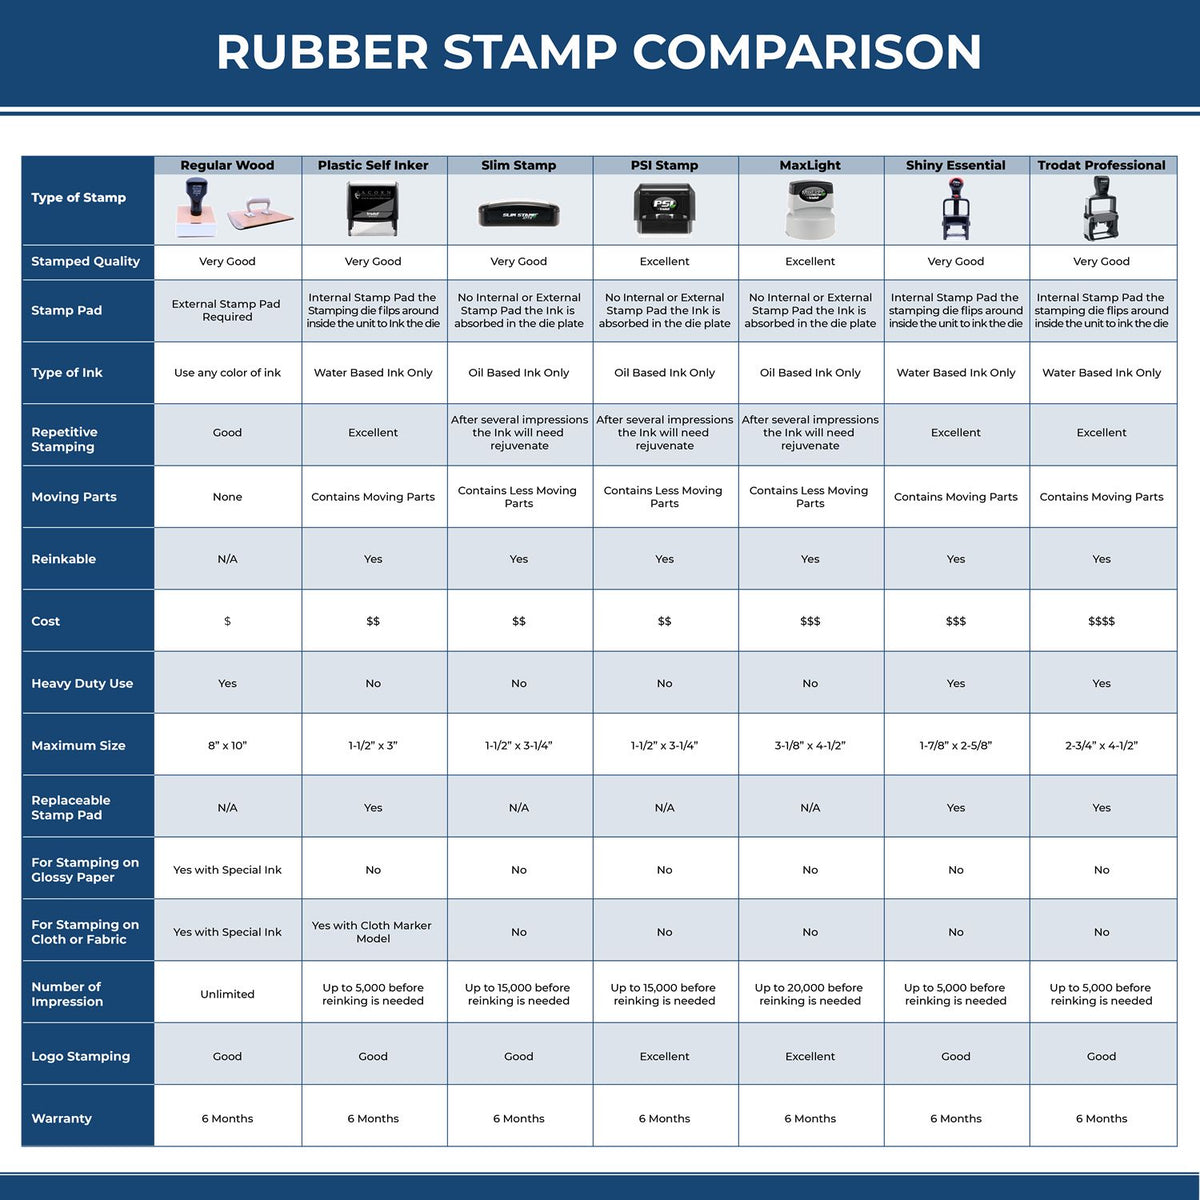 Large Self-Inking Check Your Work Stamp 5626S Rubber Stamp Comparison